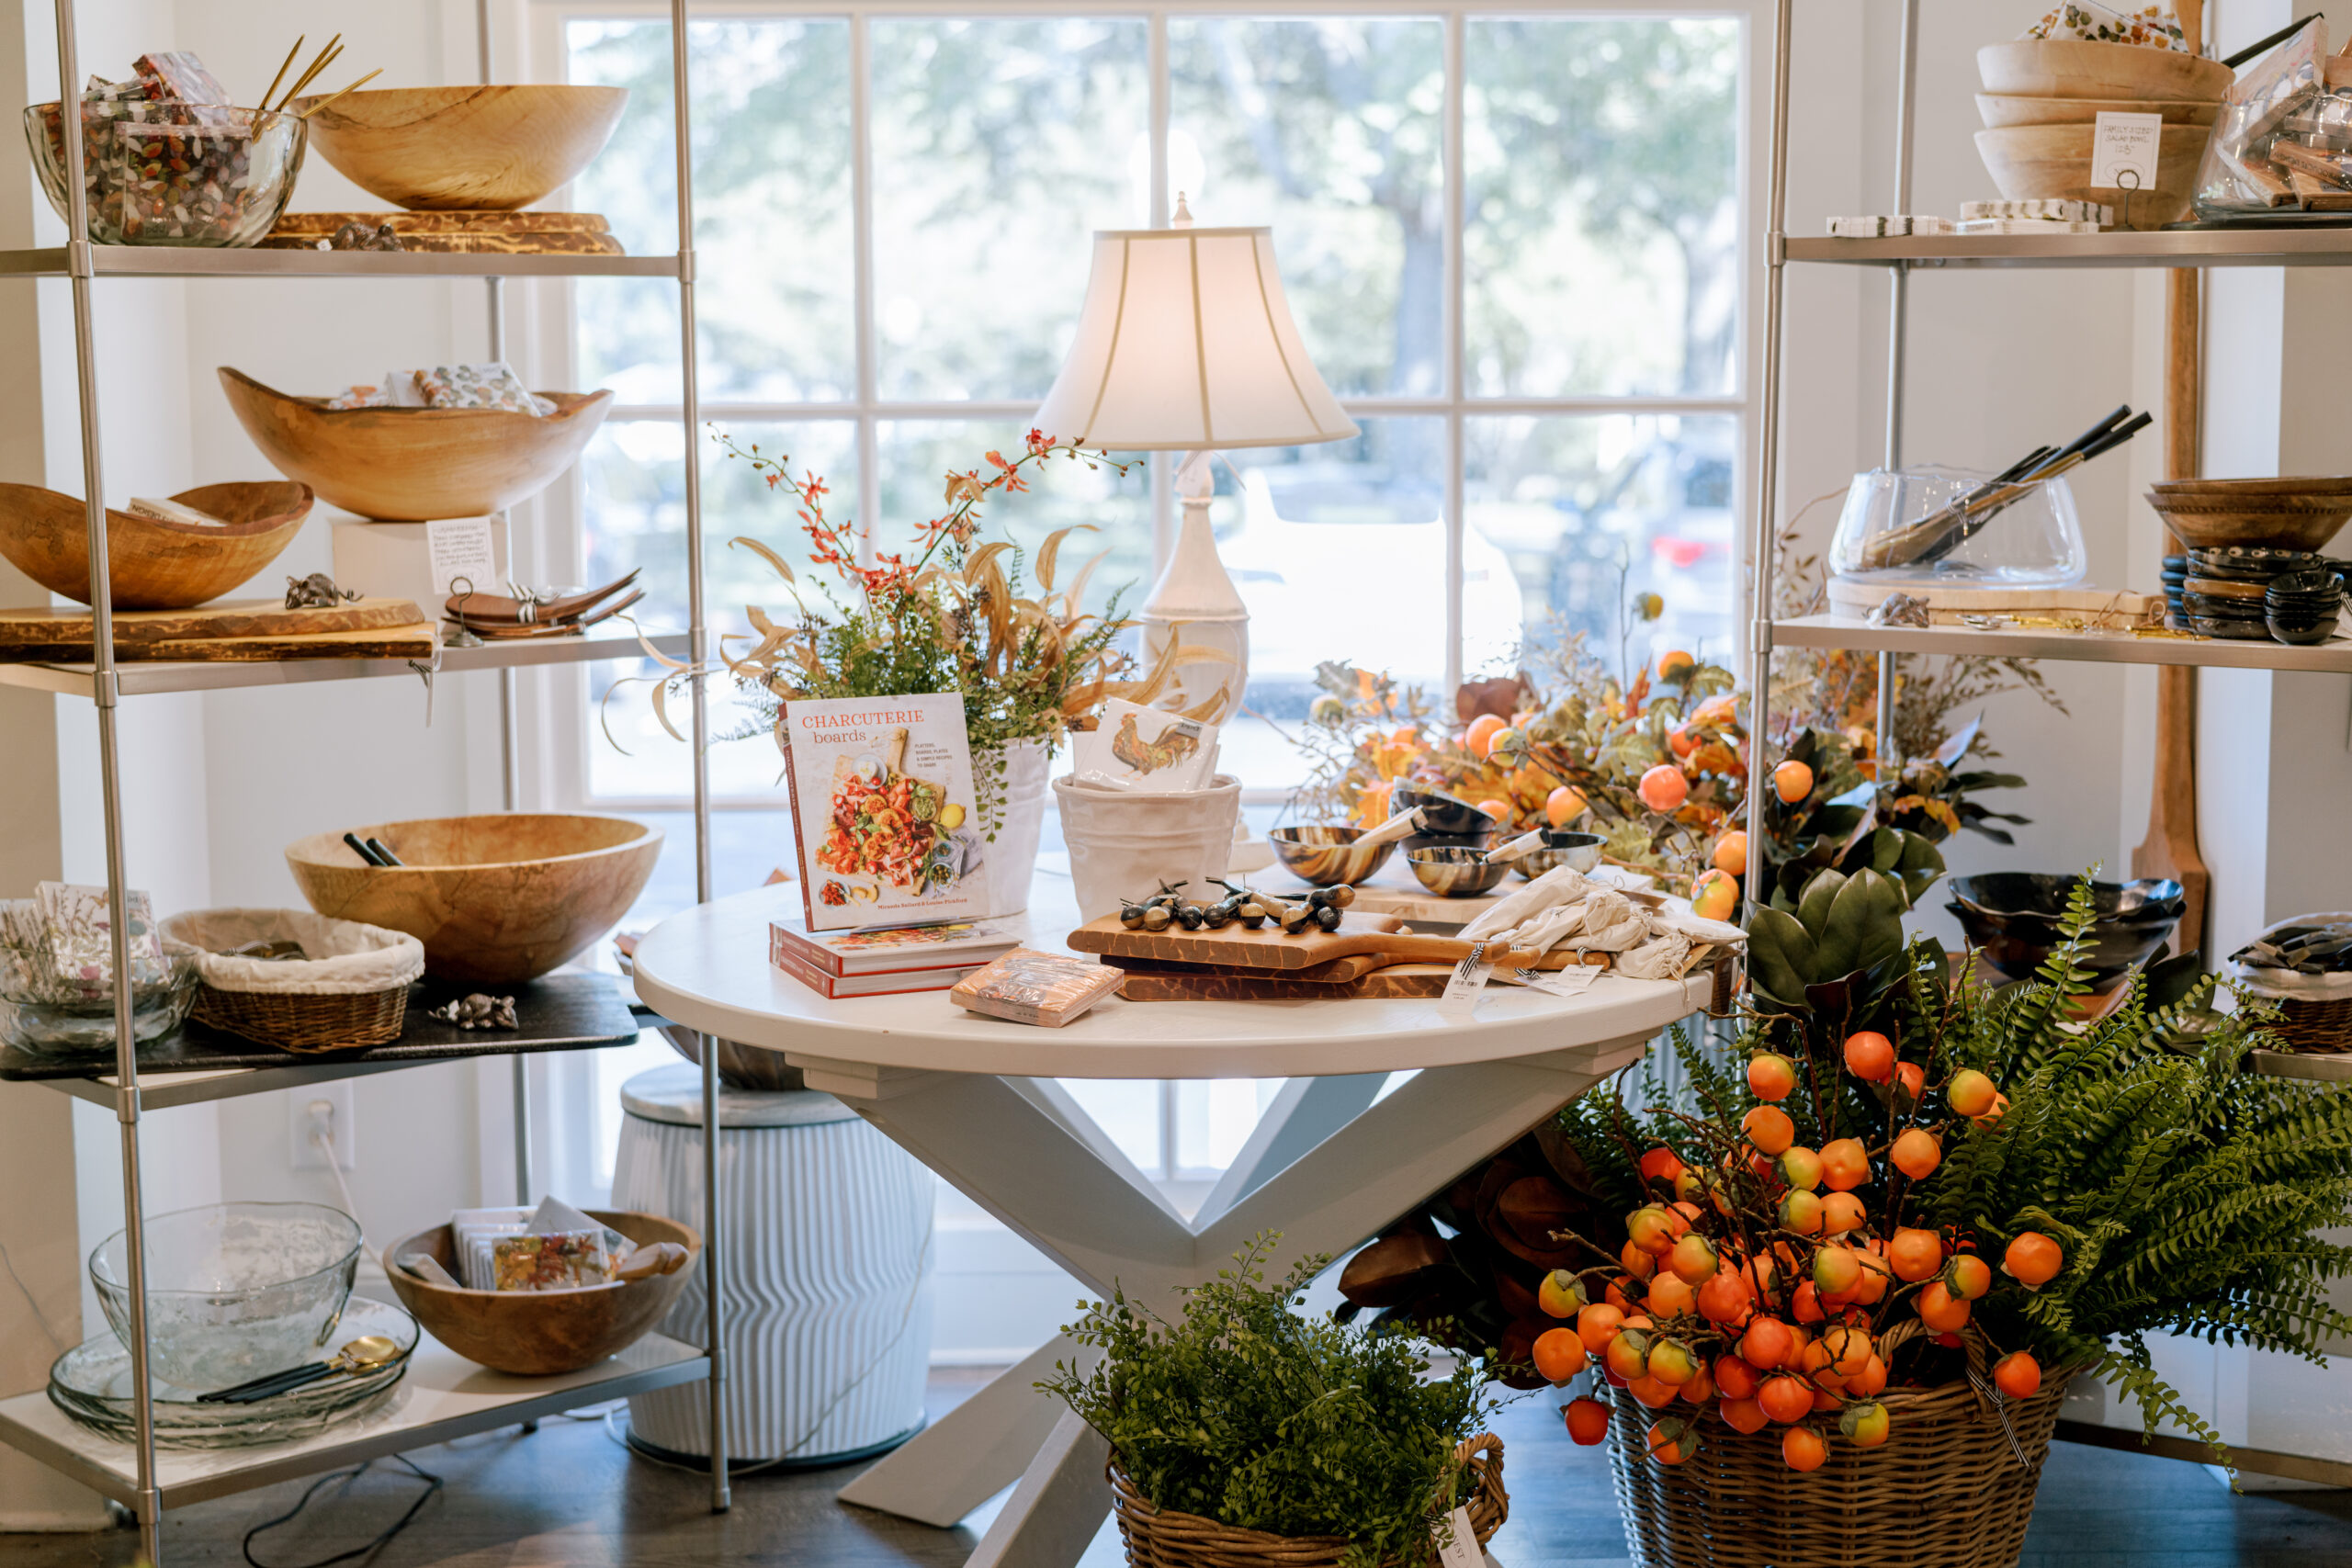 As summer soirees turn into fall fiestas, now is the perfect time to swing by Nest for all your entertaining needs, PLUS furniture, tabletop, and interior inspiration! Stock up on melamine dishes, festive glassware, flameless candles (#mood), autumnal flora, cocktail shakers, and more! 